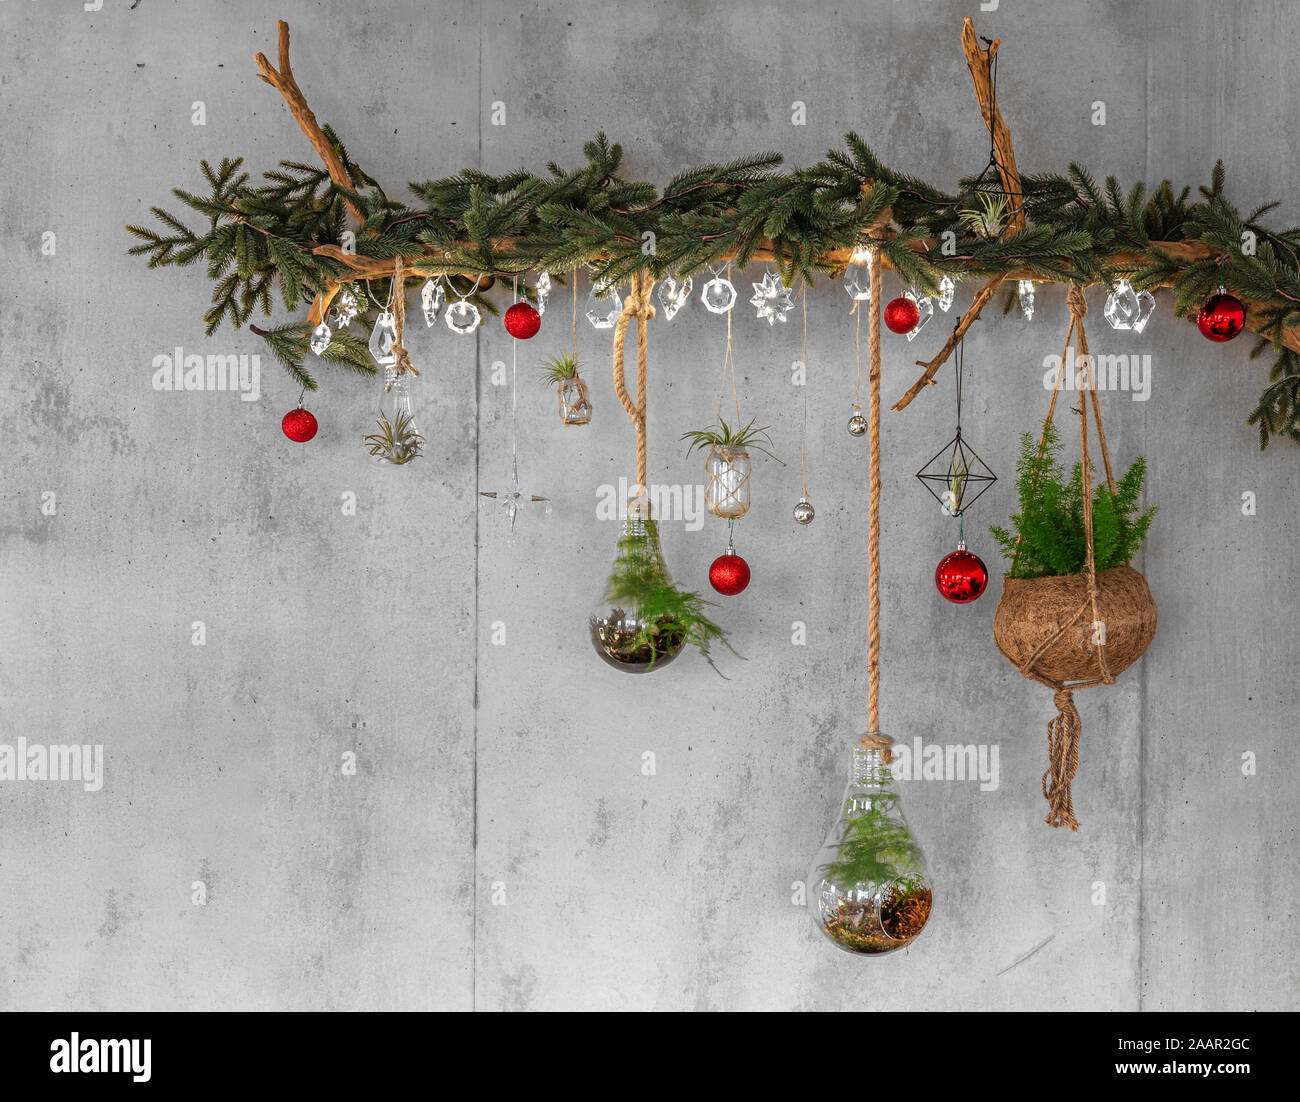 Decorative Wooden Branch with fir branches and hanging red christmas baubles, silver lights like snowflakes, fern and air plant, on a modern cement or Stock Photo